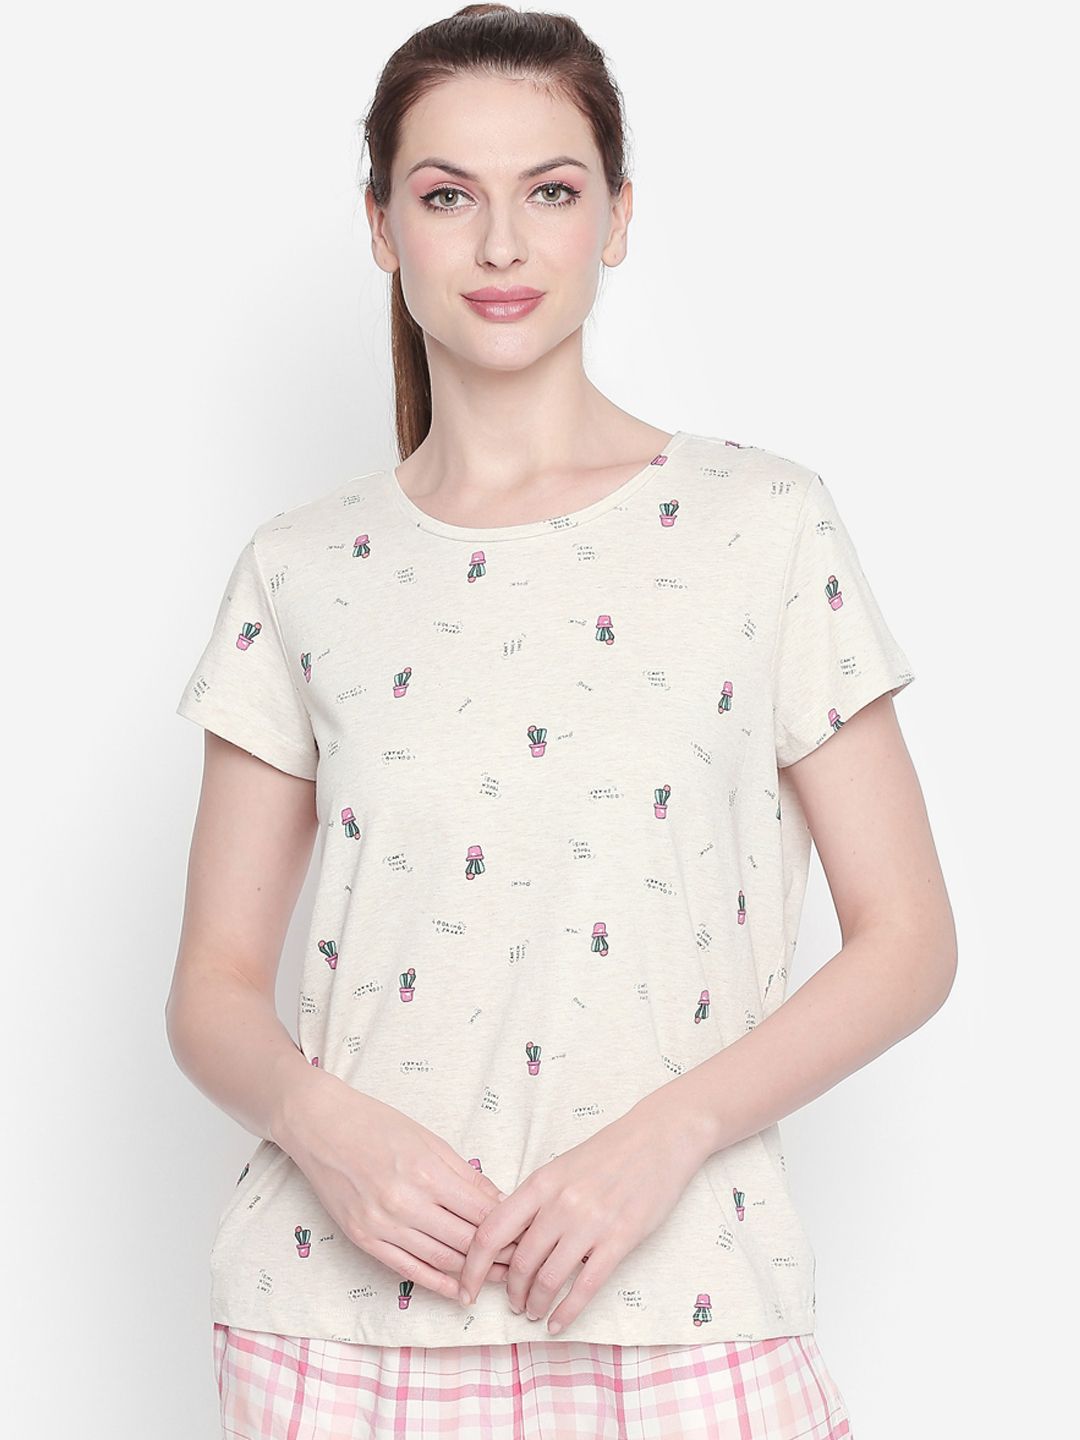 Dreamz by Pantaloons Women Cream-Coloured Printed Lounge Tshirt Price in India